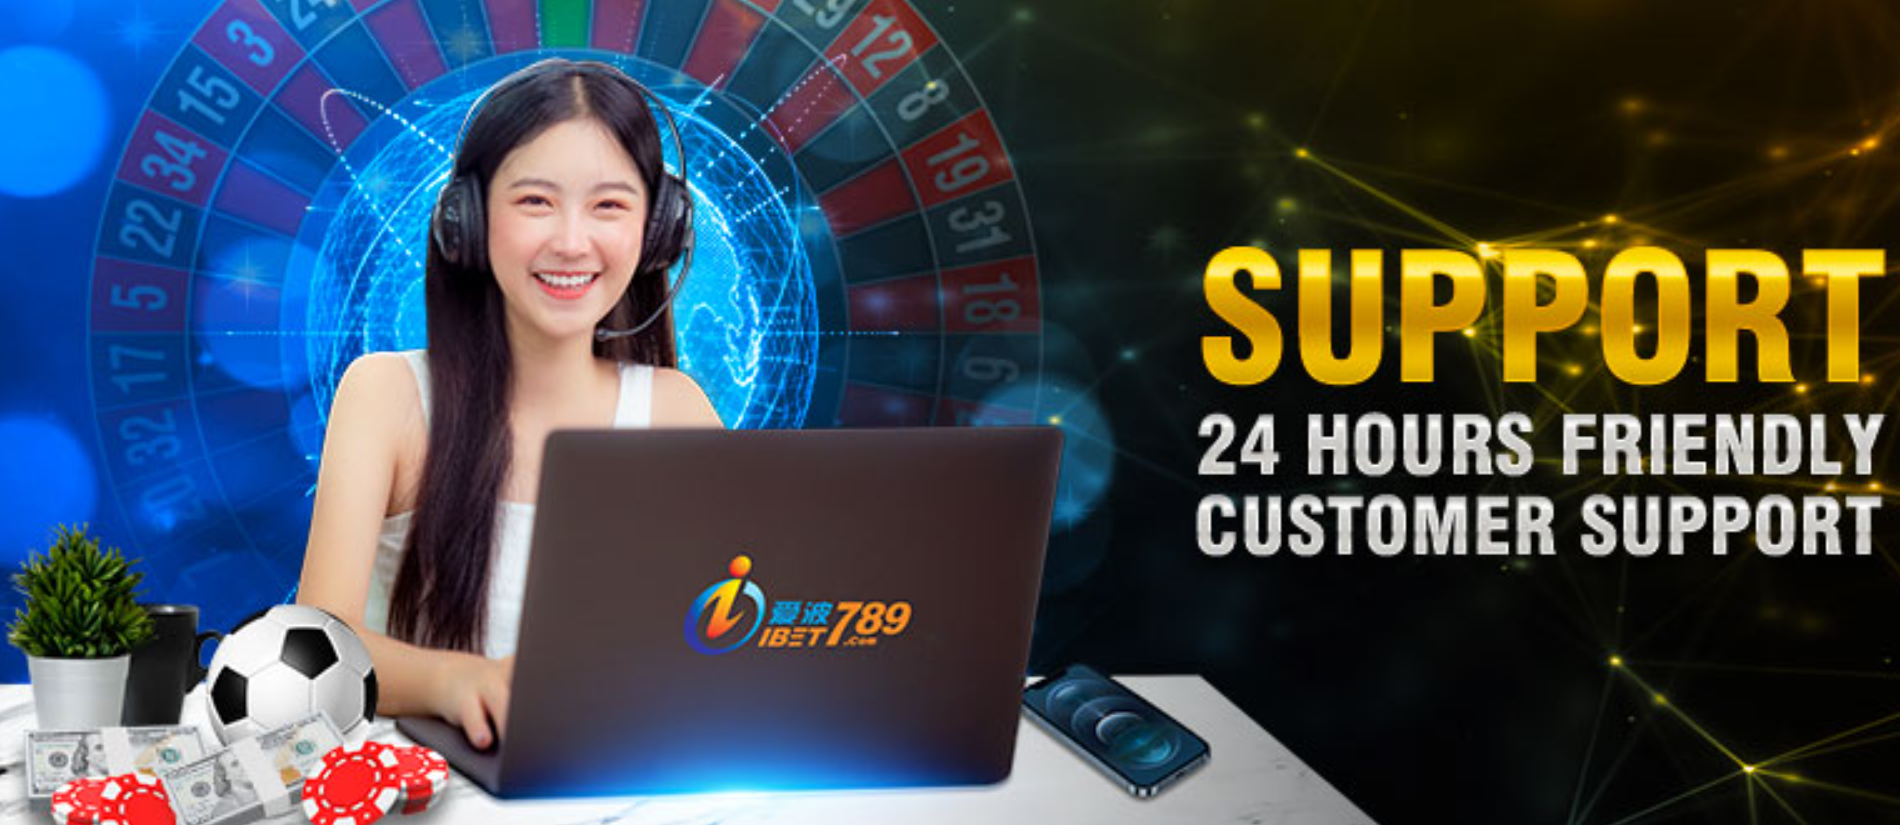 IBet789 sign up and login details